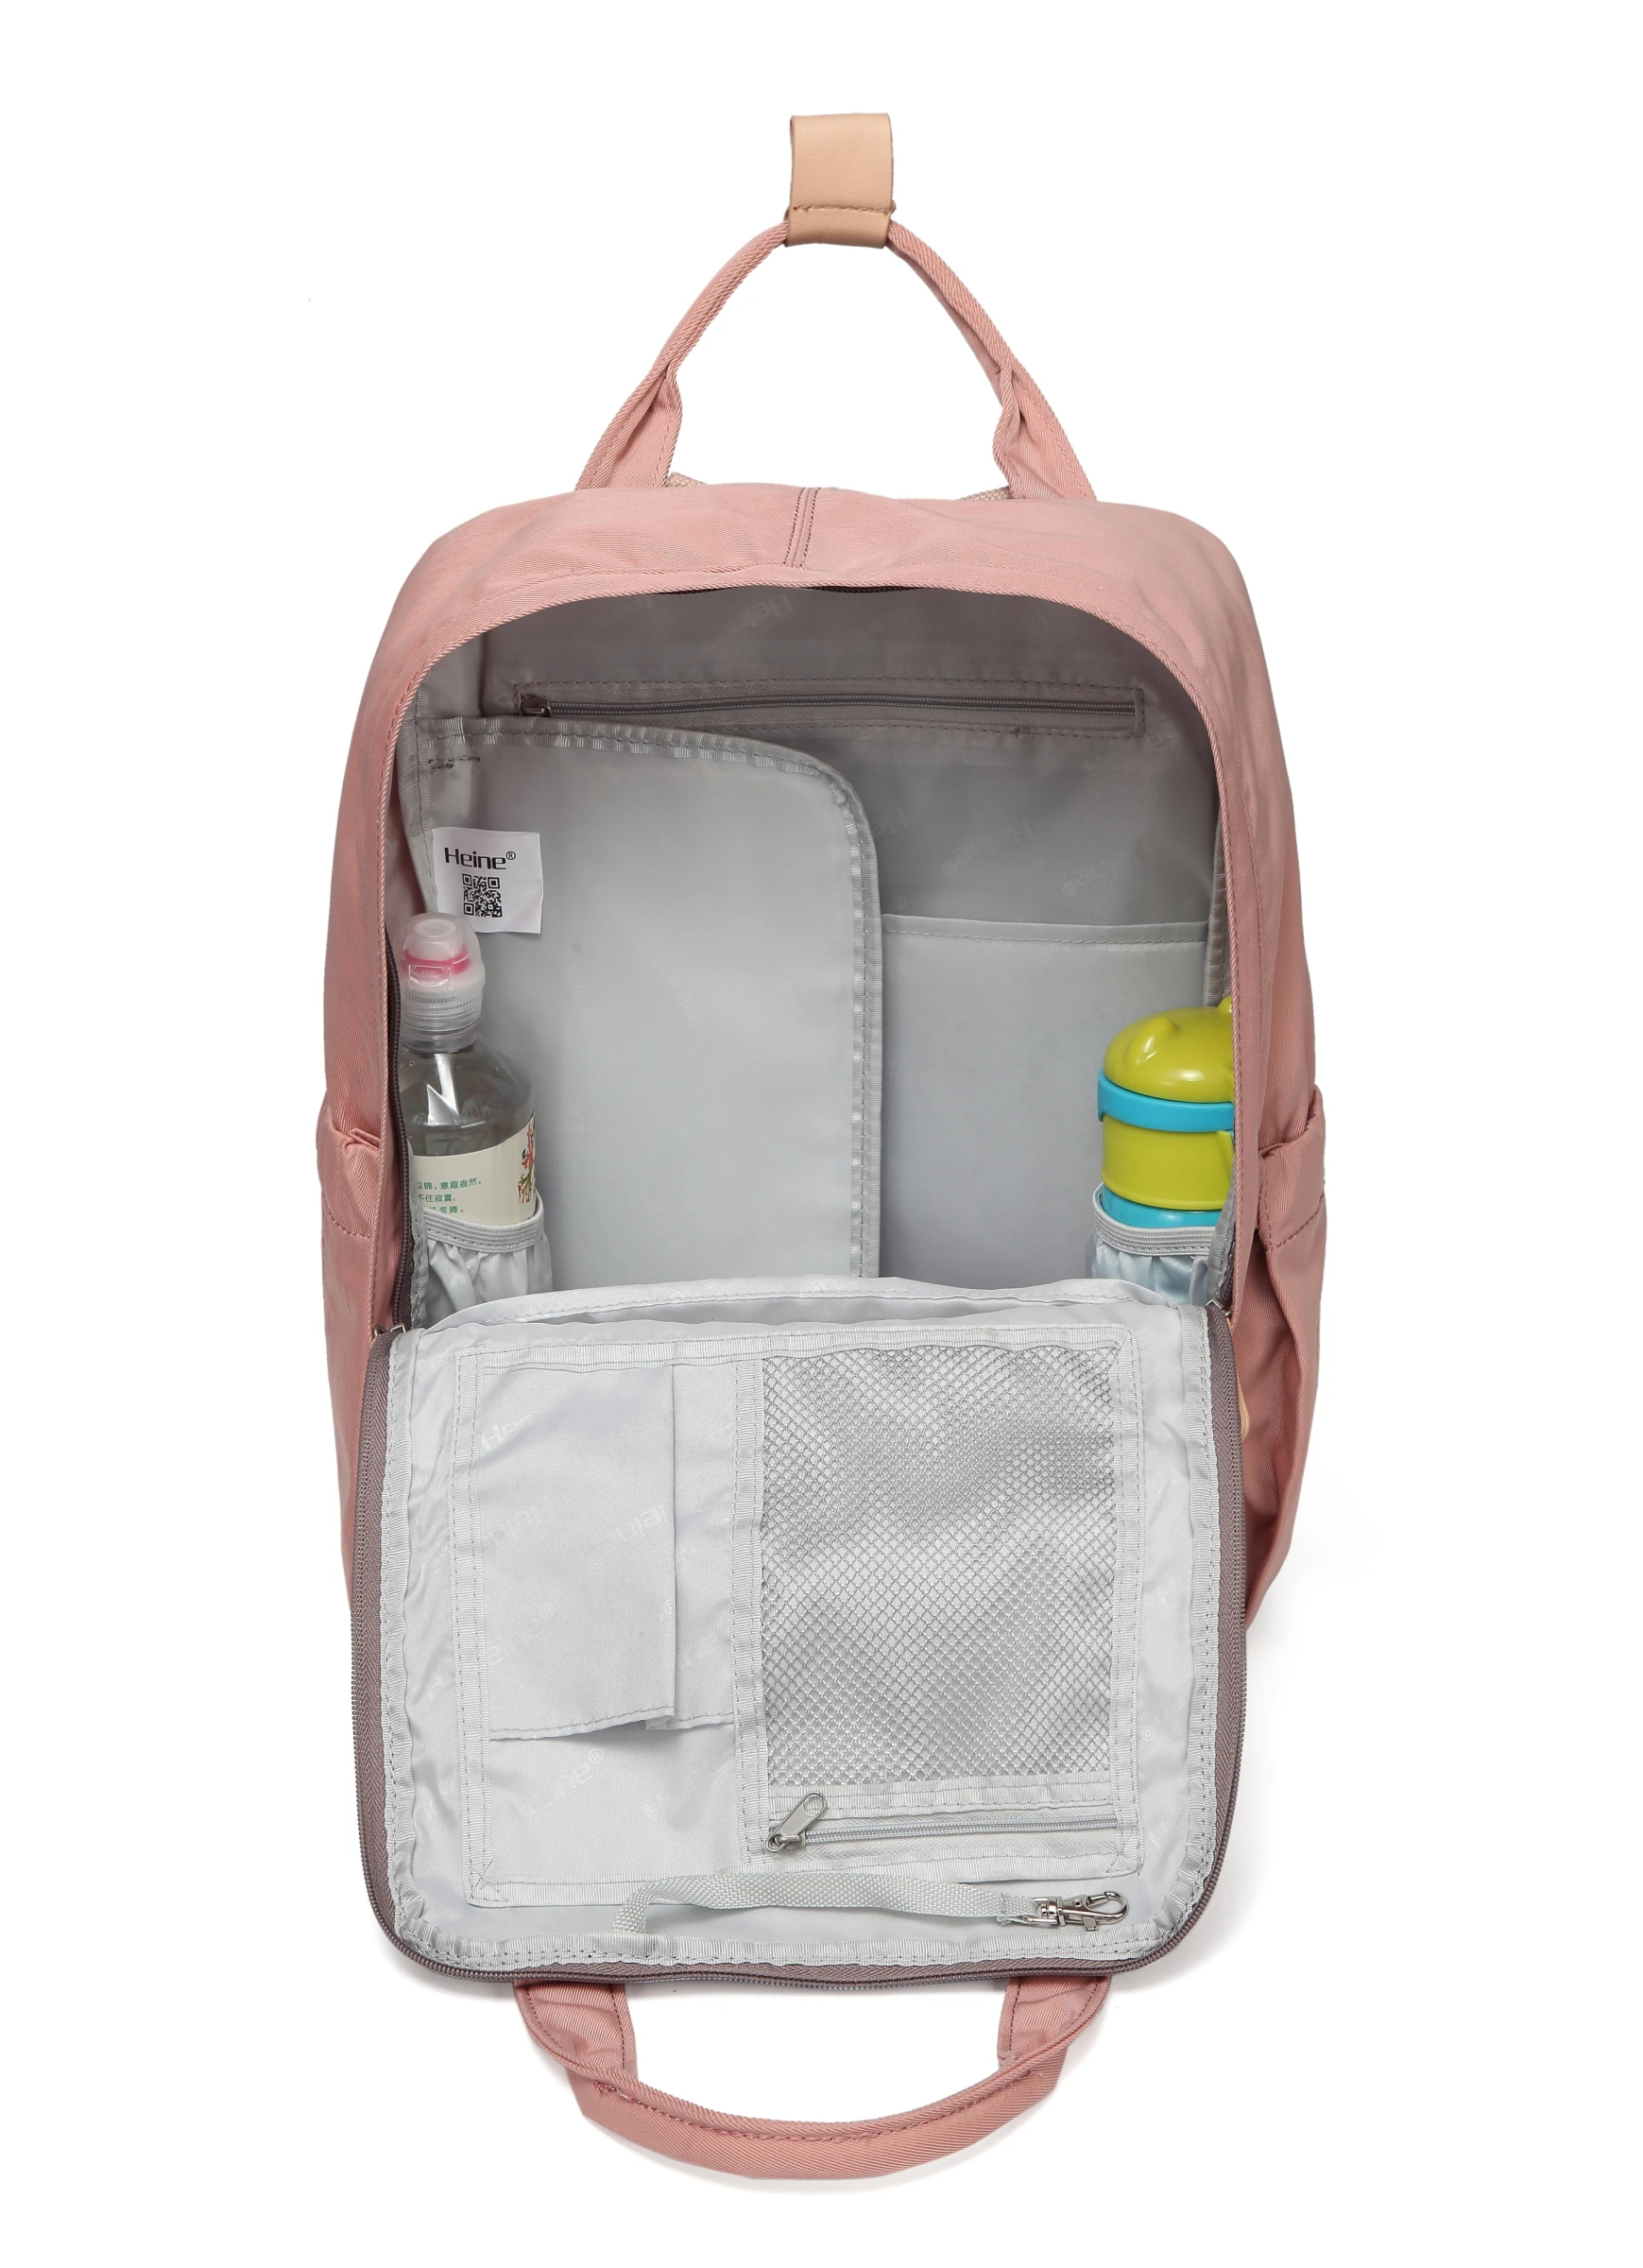 
2020 most fashion water resistant manufacture diaper backpack 